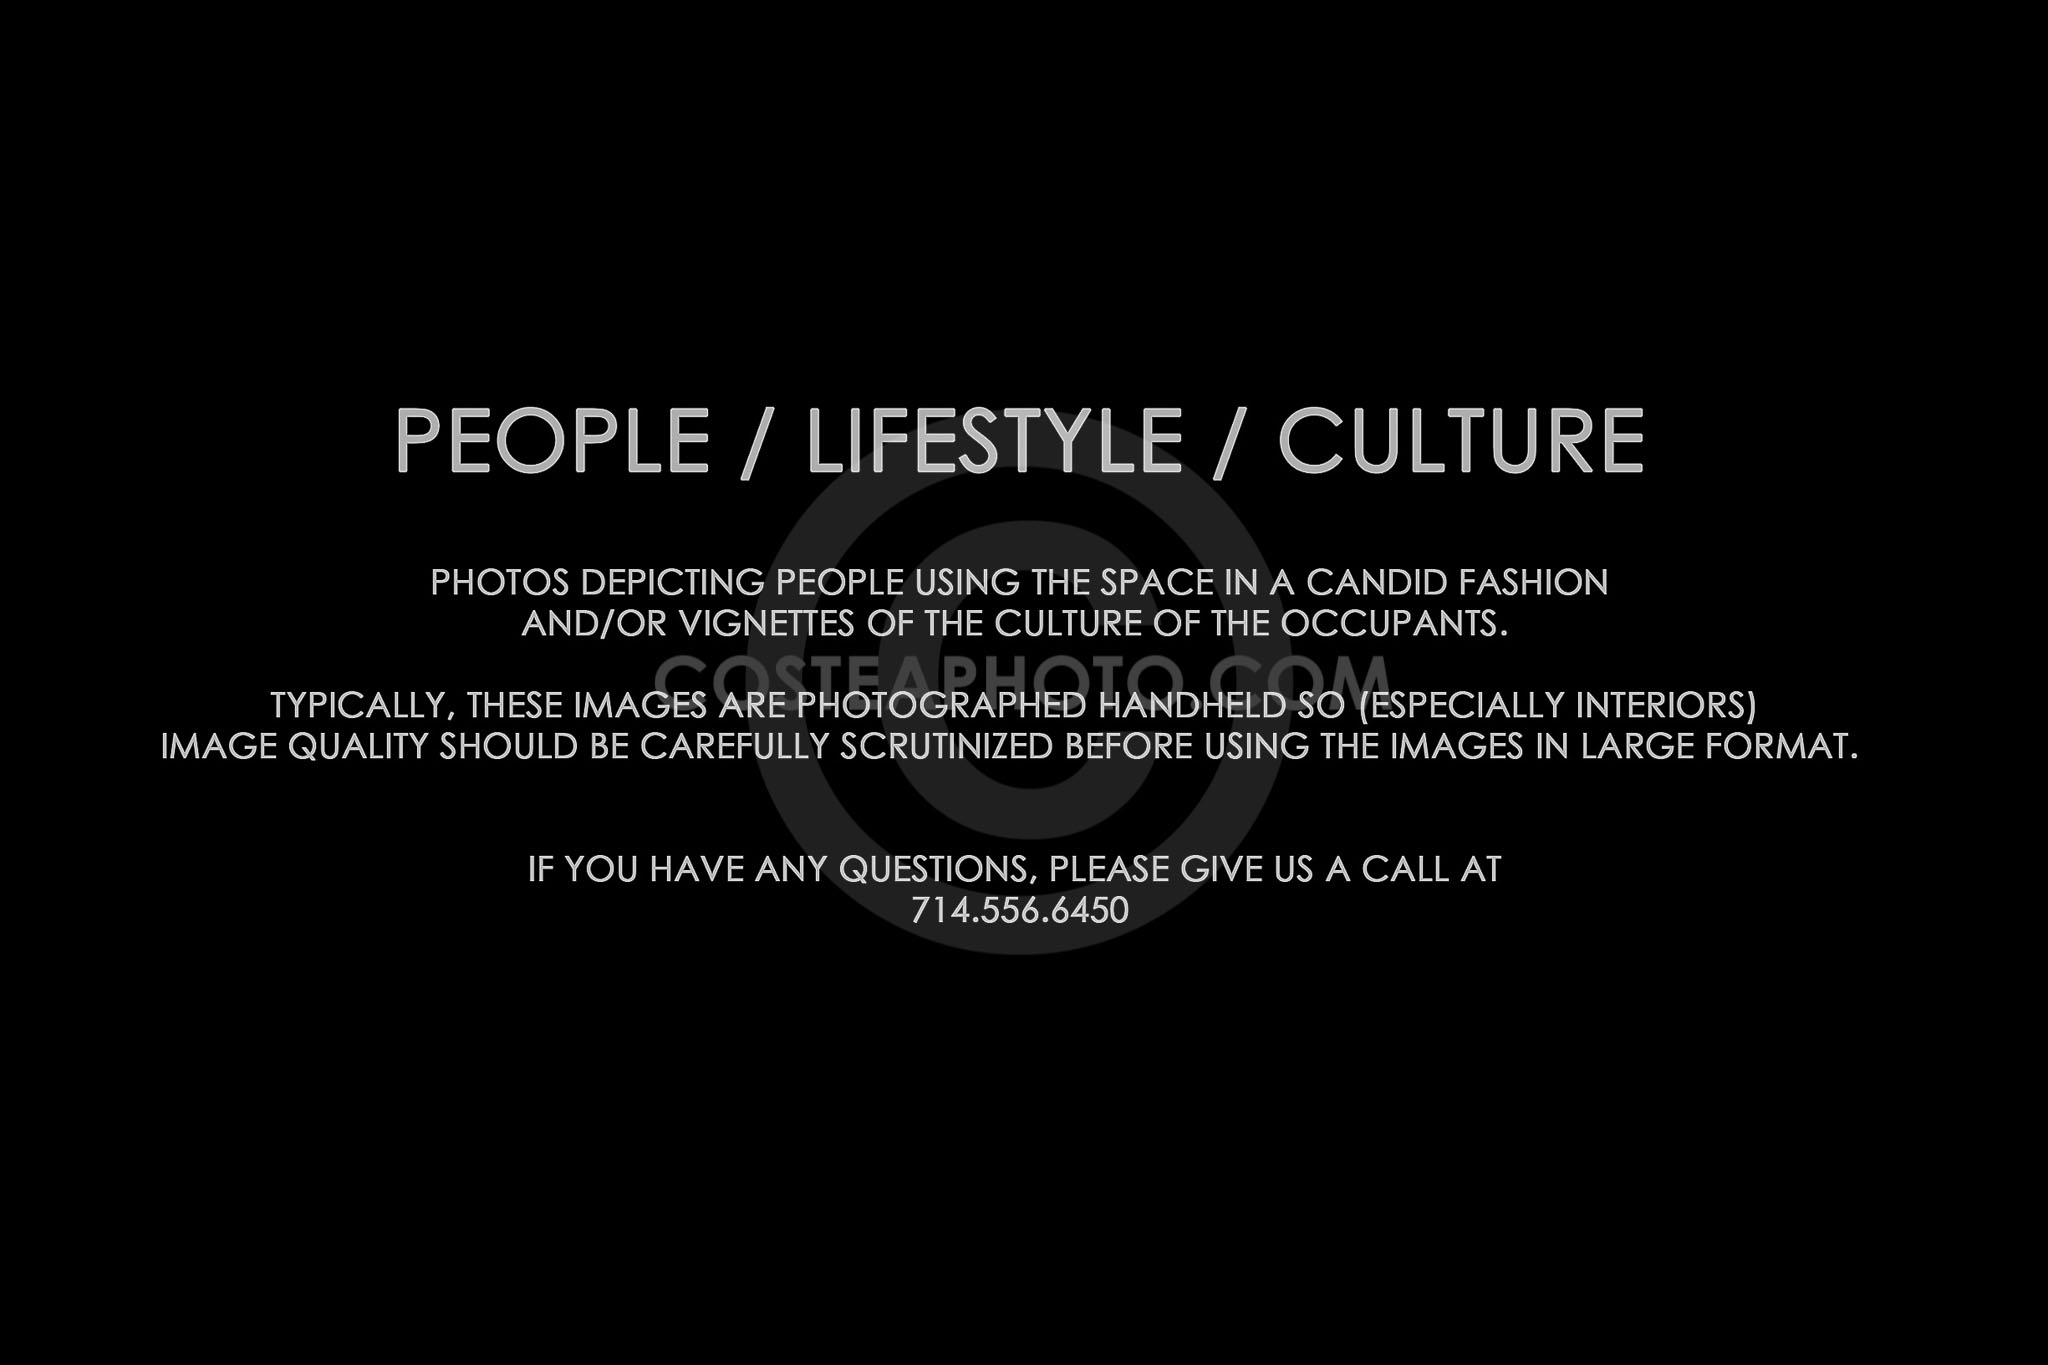 (376) TITLE PAGE - PEOPLE LIFESTYLE